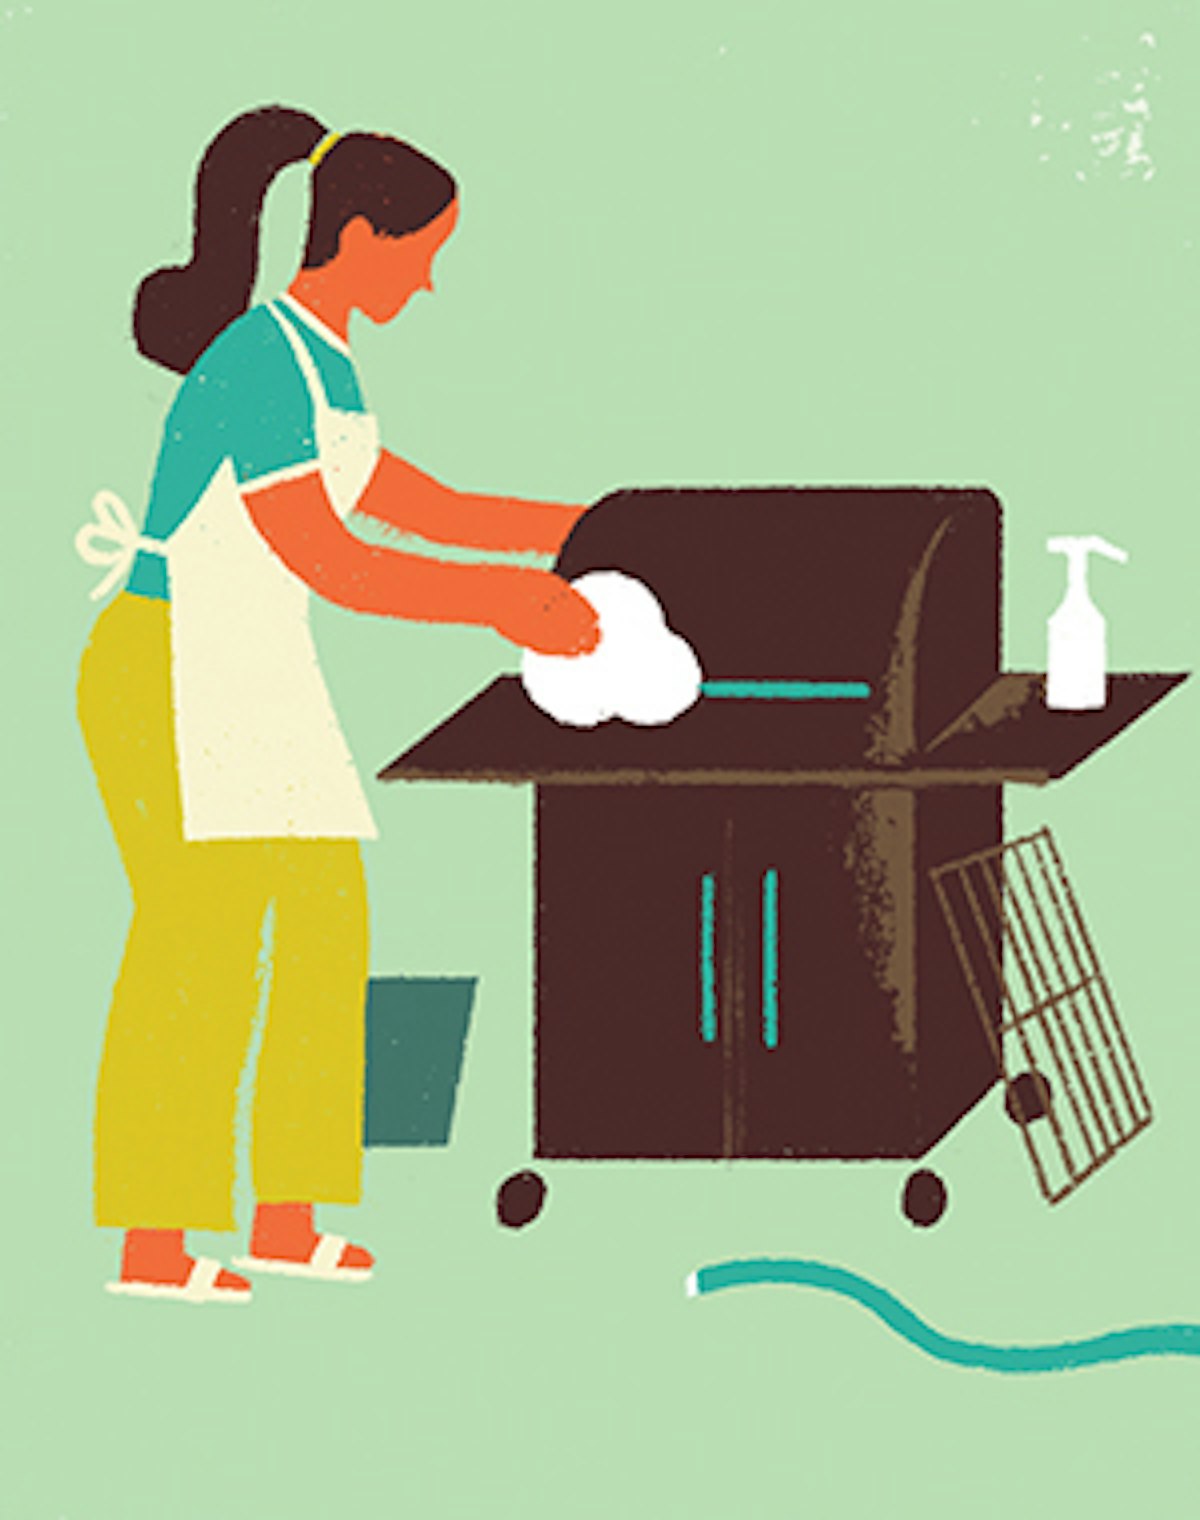 An illustration of a woman cleaning a grill.